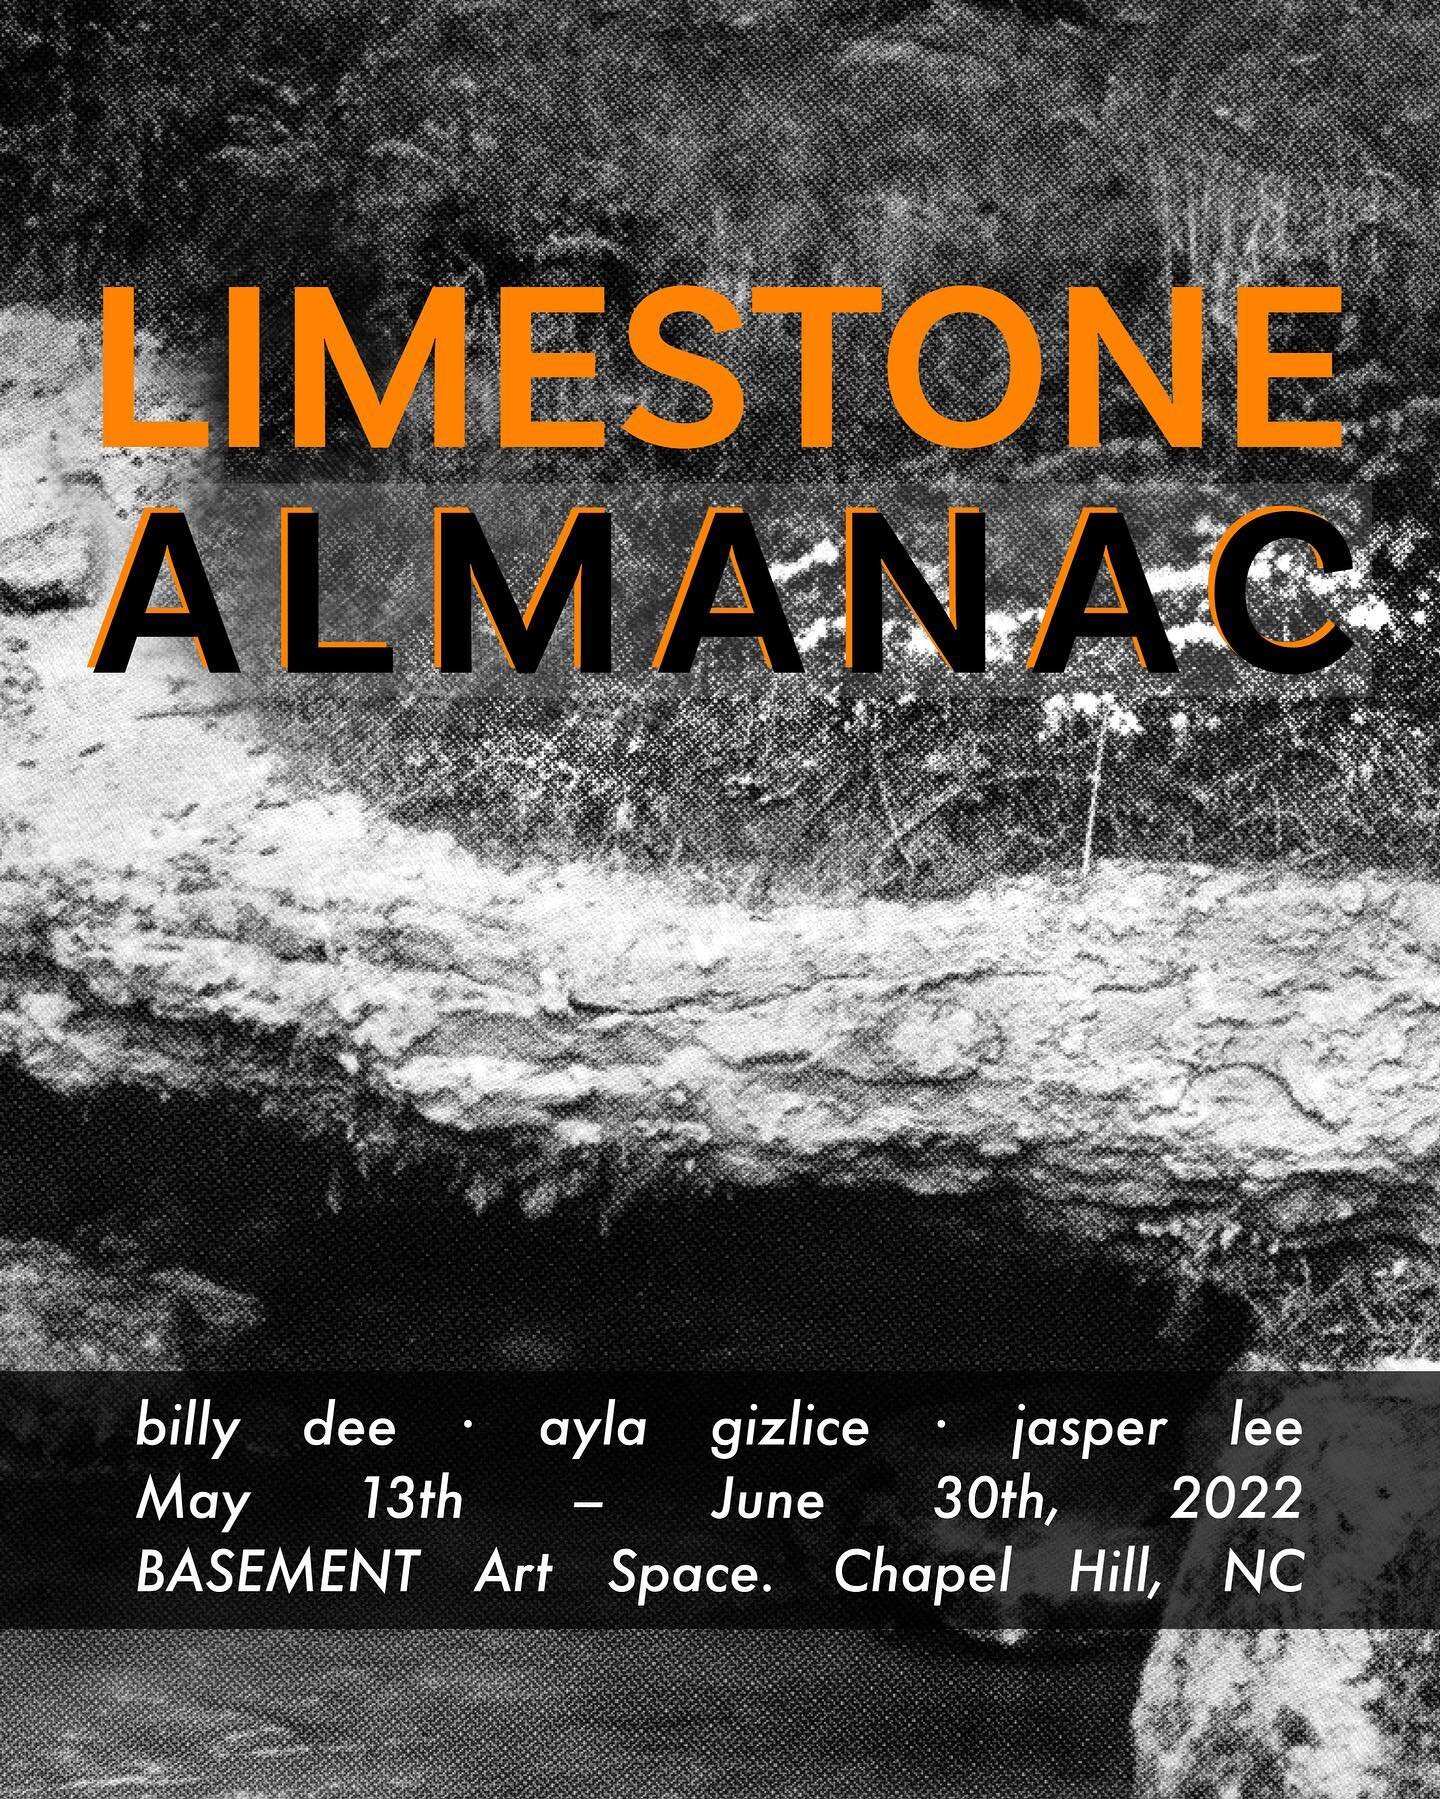 BASEMENT is excited to announce the exhibition &ldquo;Limestone Almanac,&rdquo; featuring work by Billy Dee @billlllydeeeee, Ayla Gizlice @ayla_k_g, and Jasper Lee @jaaspurrr 

Gallery hours will be held Friday May 13th, 5-8PM, and by appointment. Ma